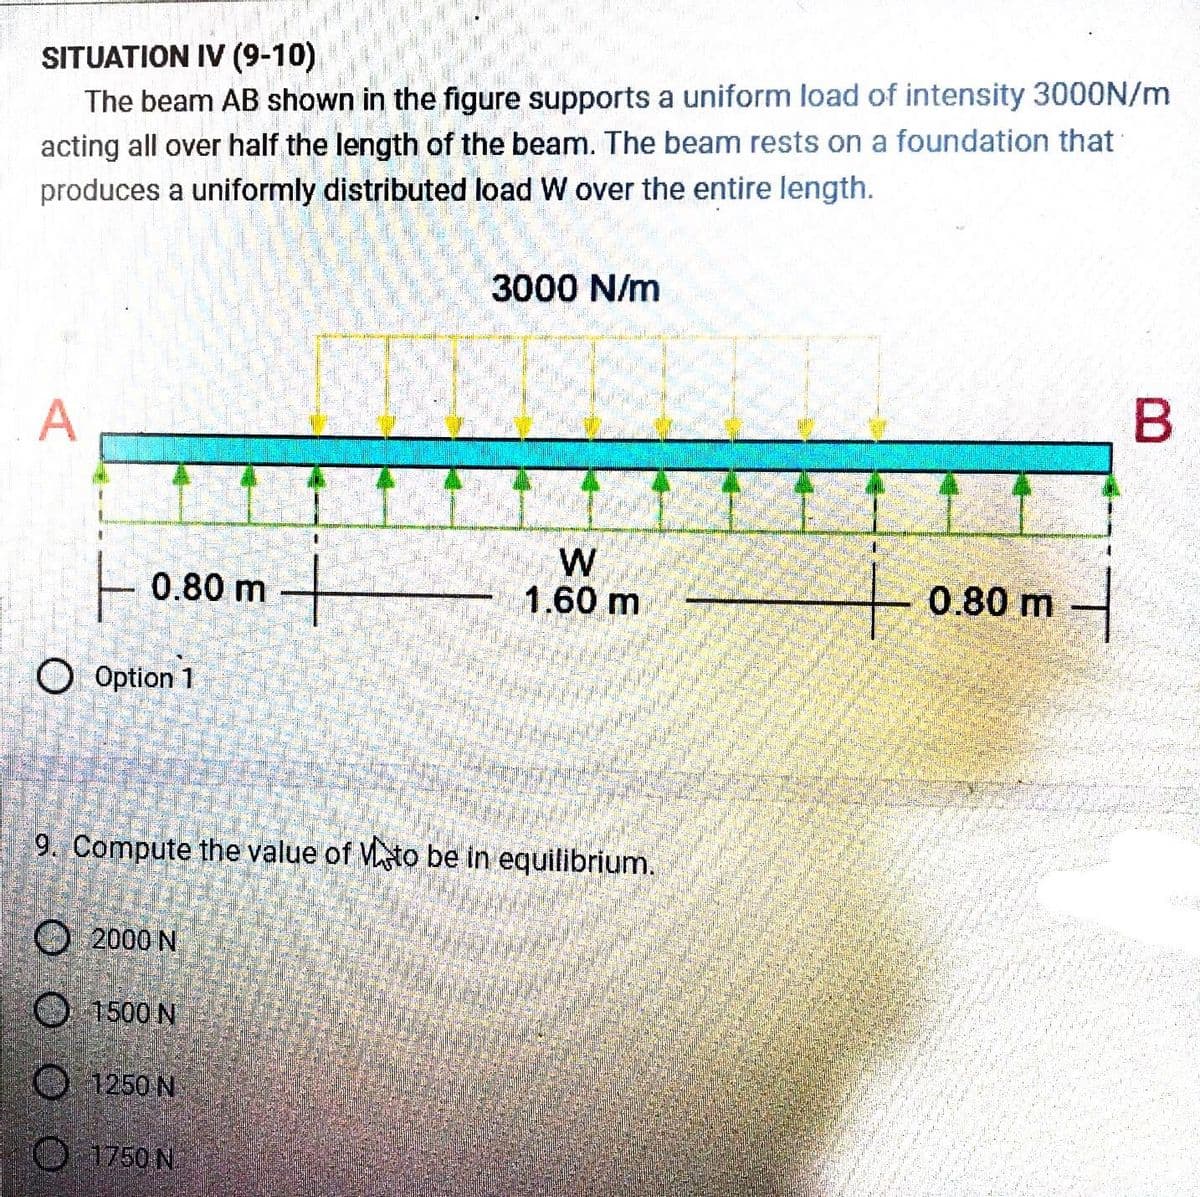 SITUATION IV (9-10)
The beam AB shown in the figure supports a uniform load of intensity 3000N/m
acting all over half the length of the beam. The beam rests on a foundation that
produces a uniformly distributed load W over the entire length.
A
ㅏ
Option 1
0.80 m
2000 N
9. Compute the value of Vato be in equilibrium.
1500 N
1250 N
3000 N/m
1750 N
W
1.60 m
+0.80 m
they
0987
BERNABANDER
B